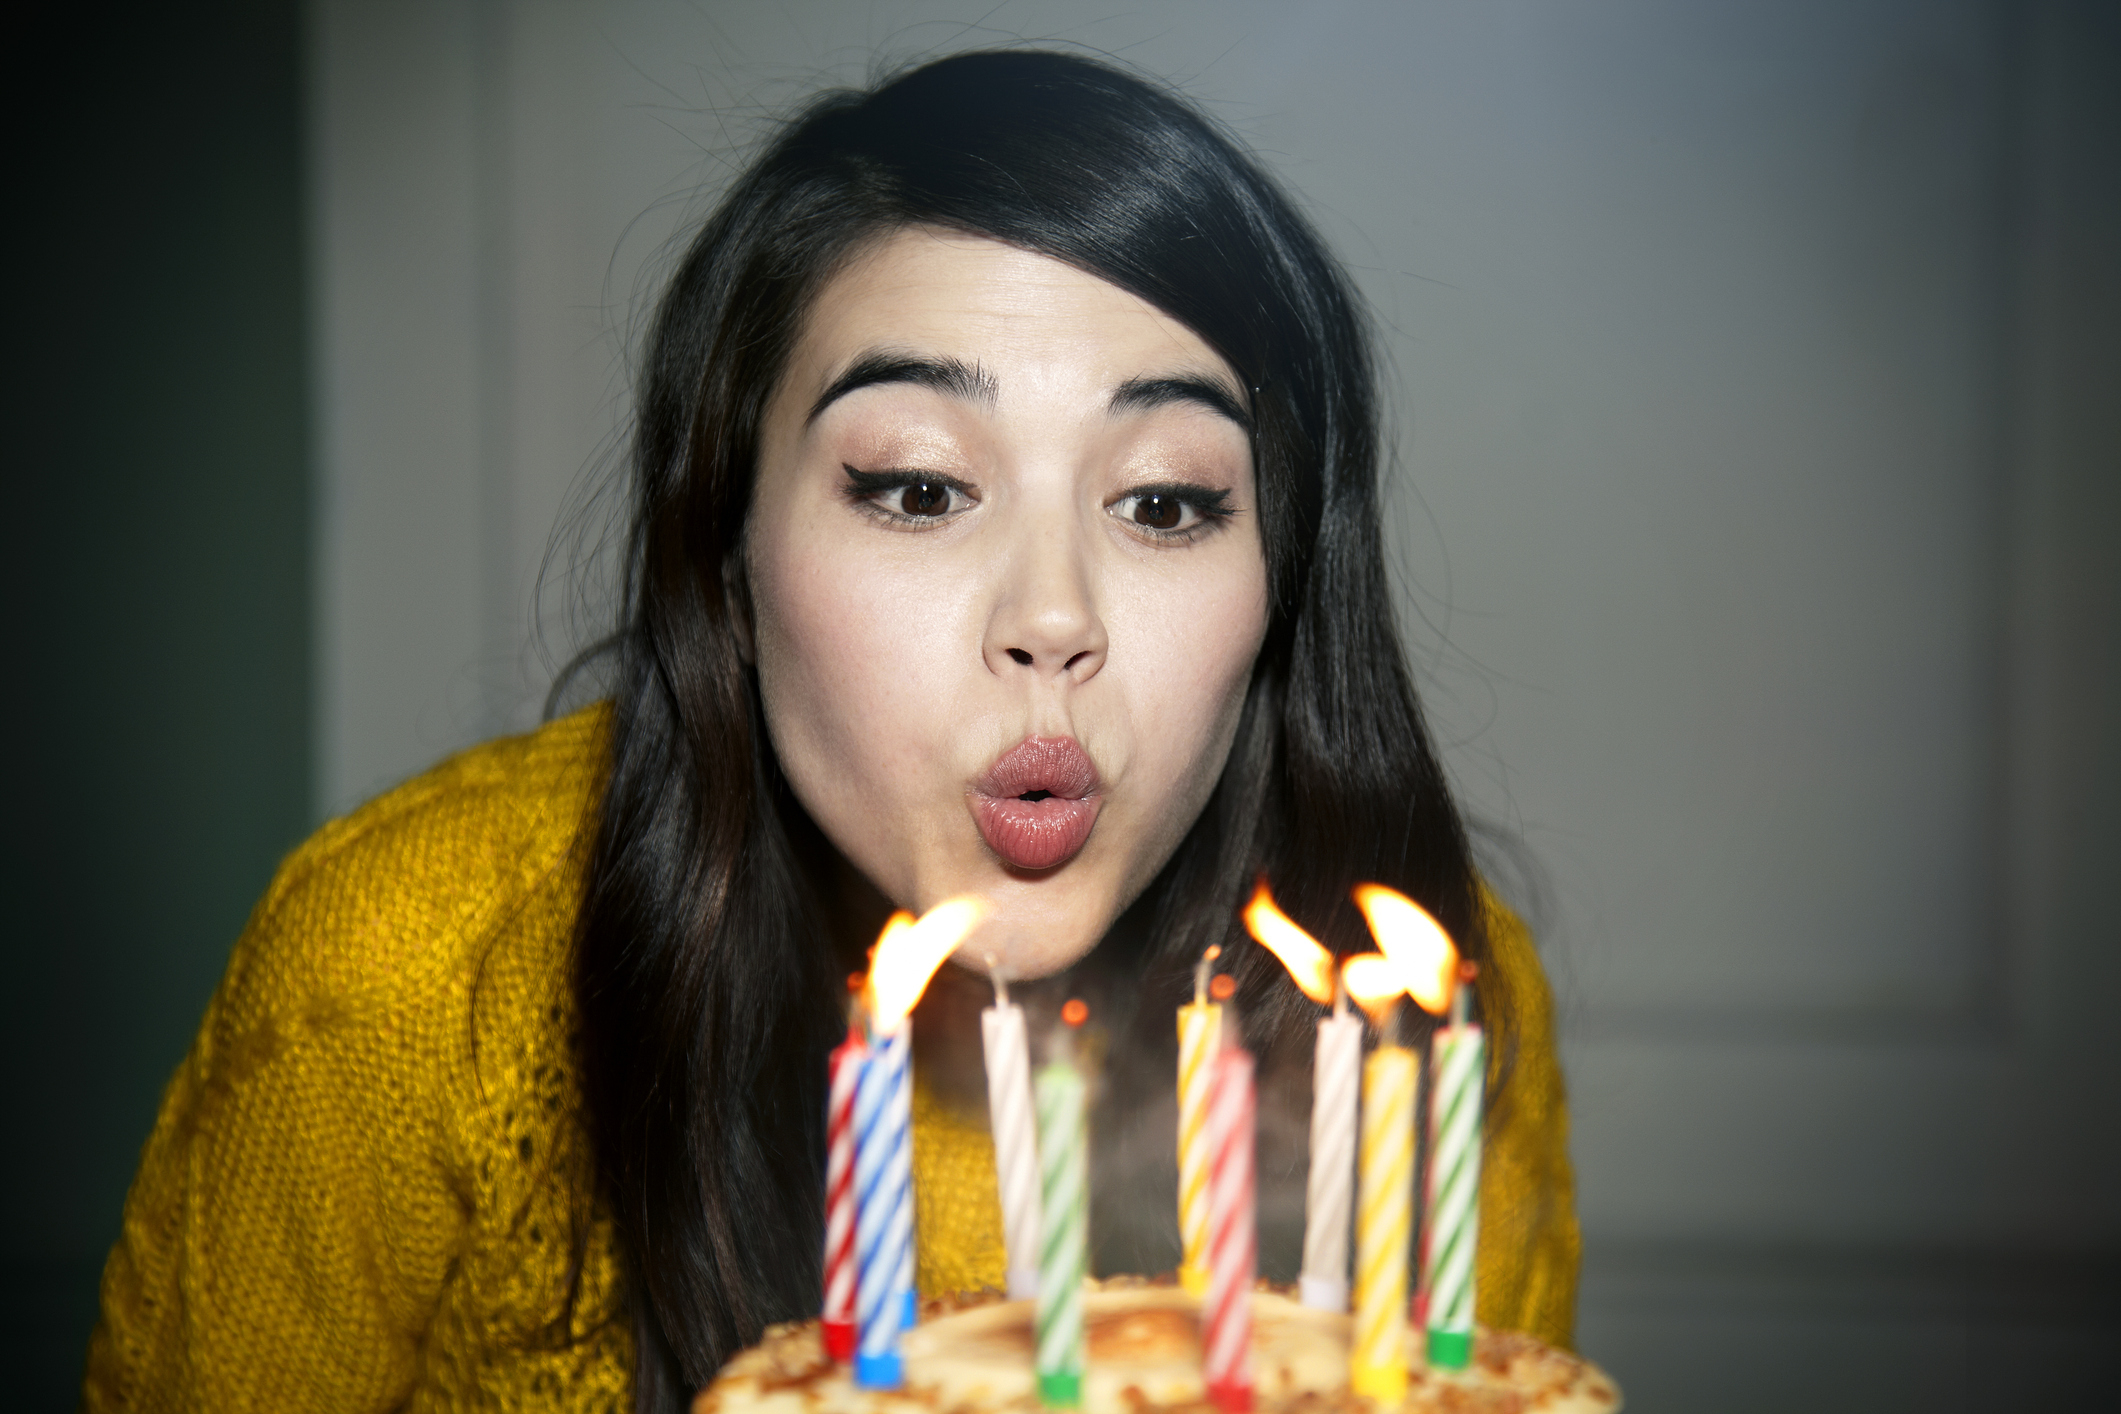 A person blowing out birthday candles on a cake